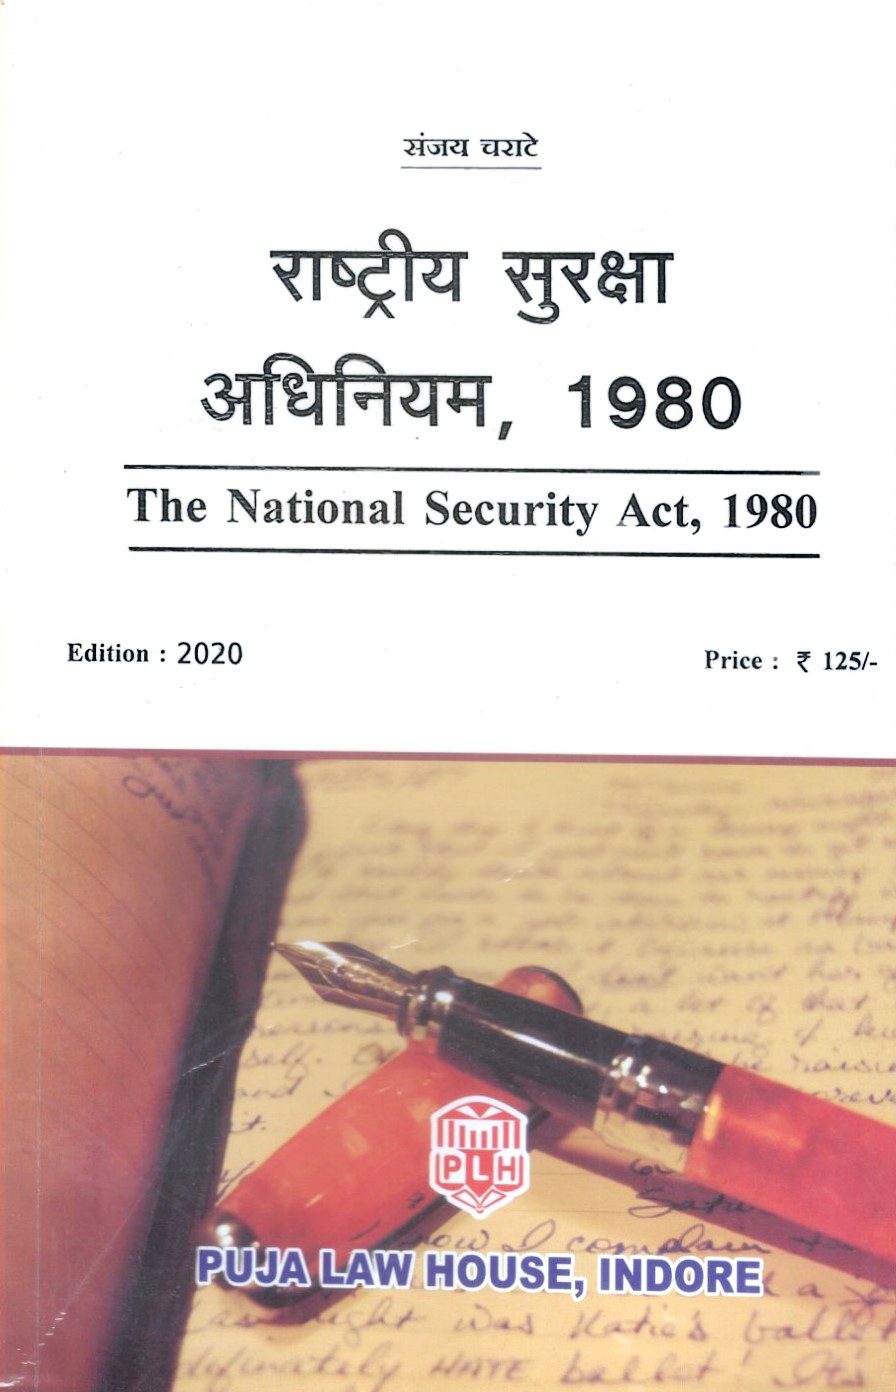  Buy The National Security Act, 1980 / राष्ट्रीय सुरक्षा अधिनियम, 1980